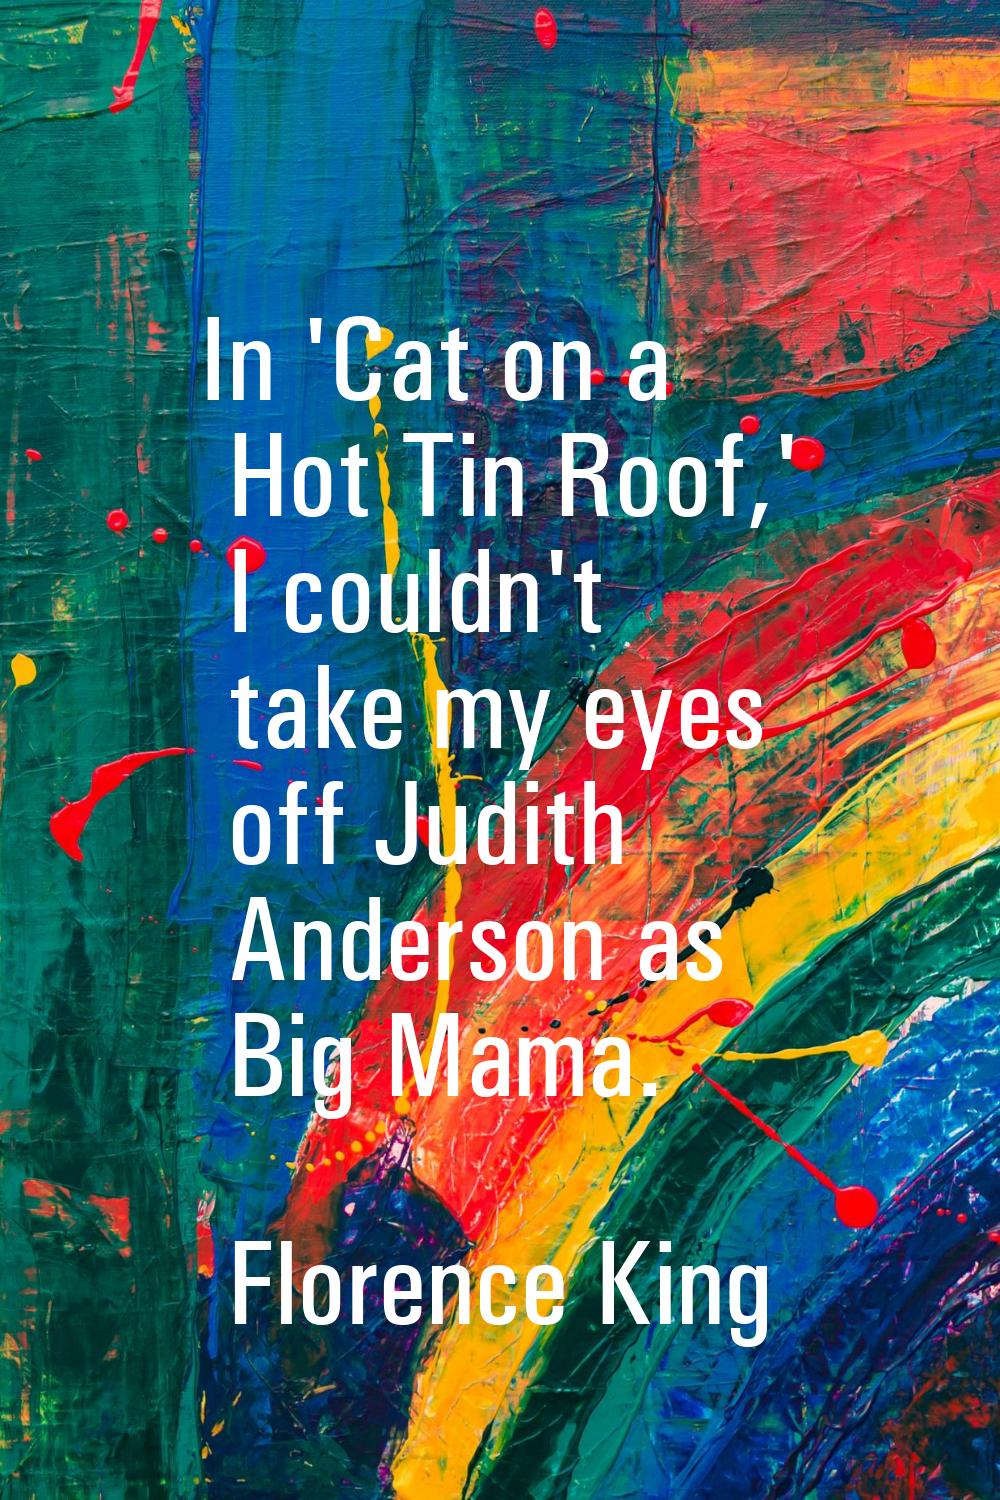 In 'Cat on a Hot Tin Roof,' I couldn't take my eyes off Judith Anderson as Big Mama.